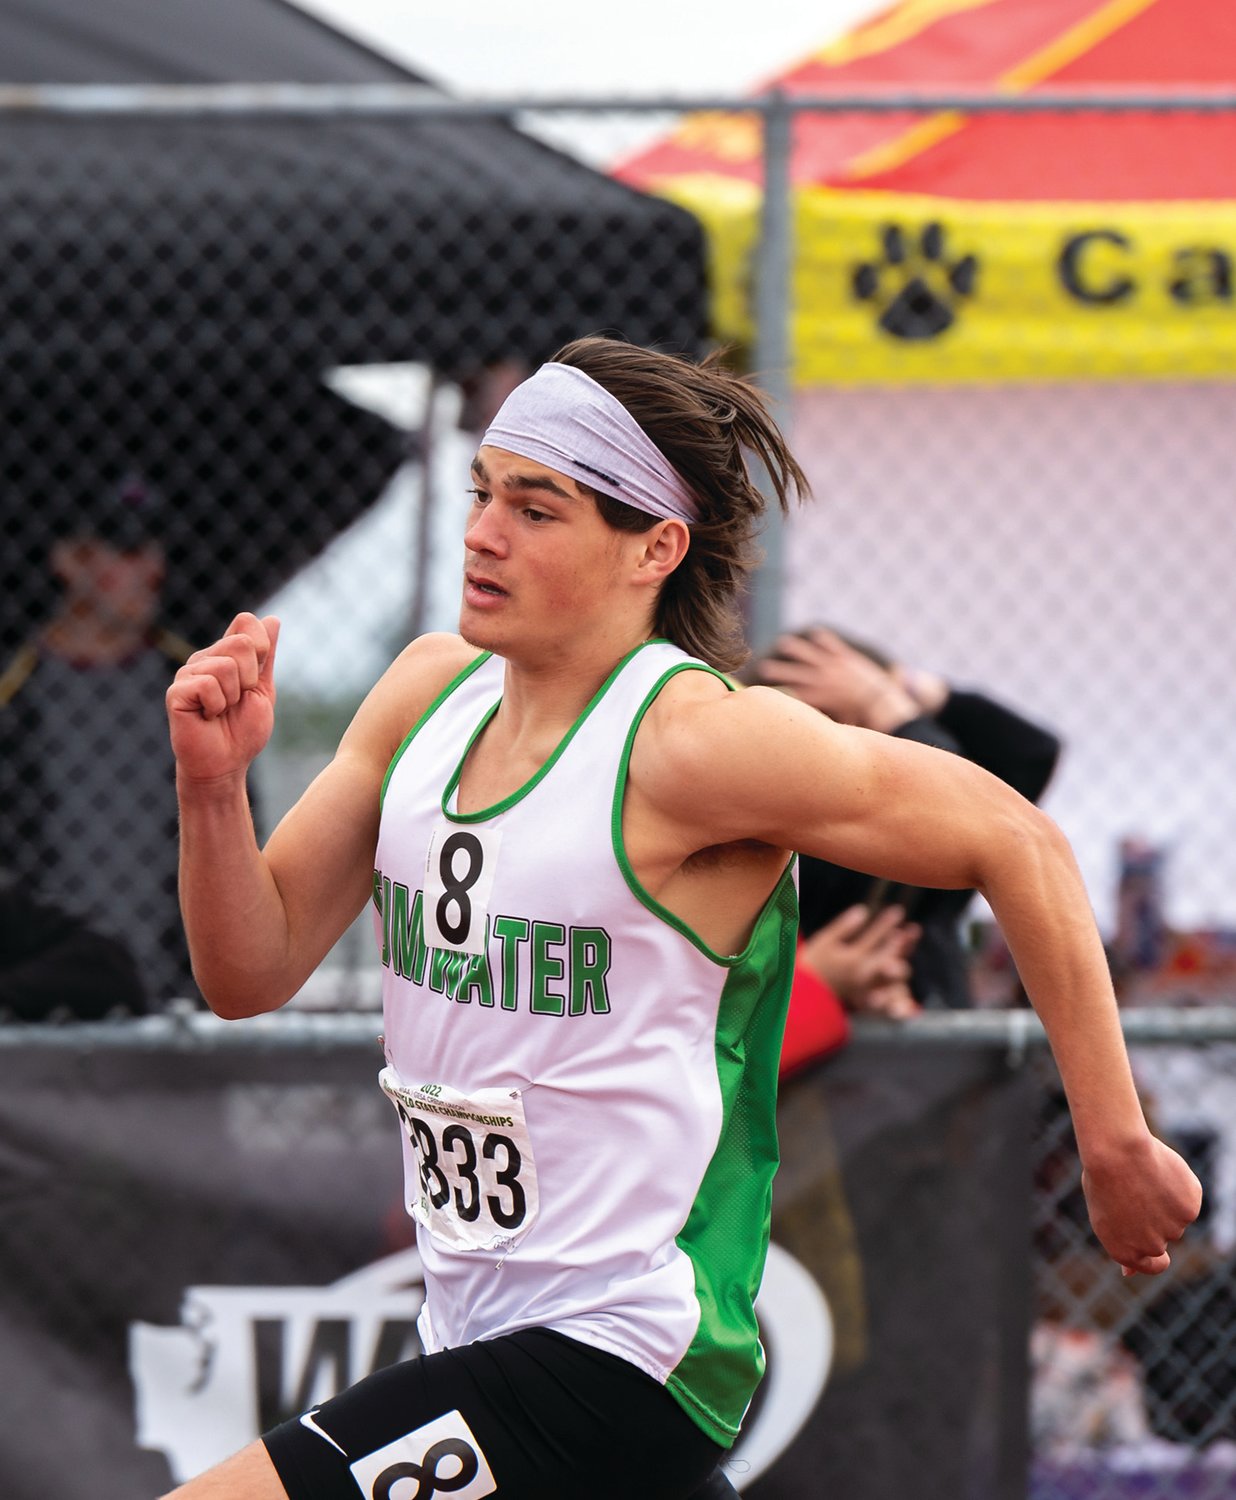 Tumwater's Reis Howell races in the 2A Boys 400 at the 4A/3A/2A State Track and Field Championships on Friday, May 27, 2022, at Mount Tahoma High School in Tacoma. (Joshua Hart/For The Chronicle)